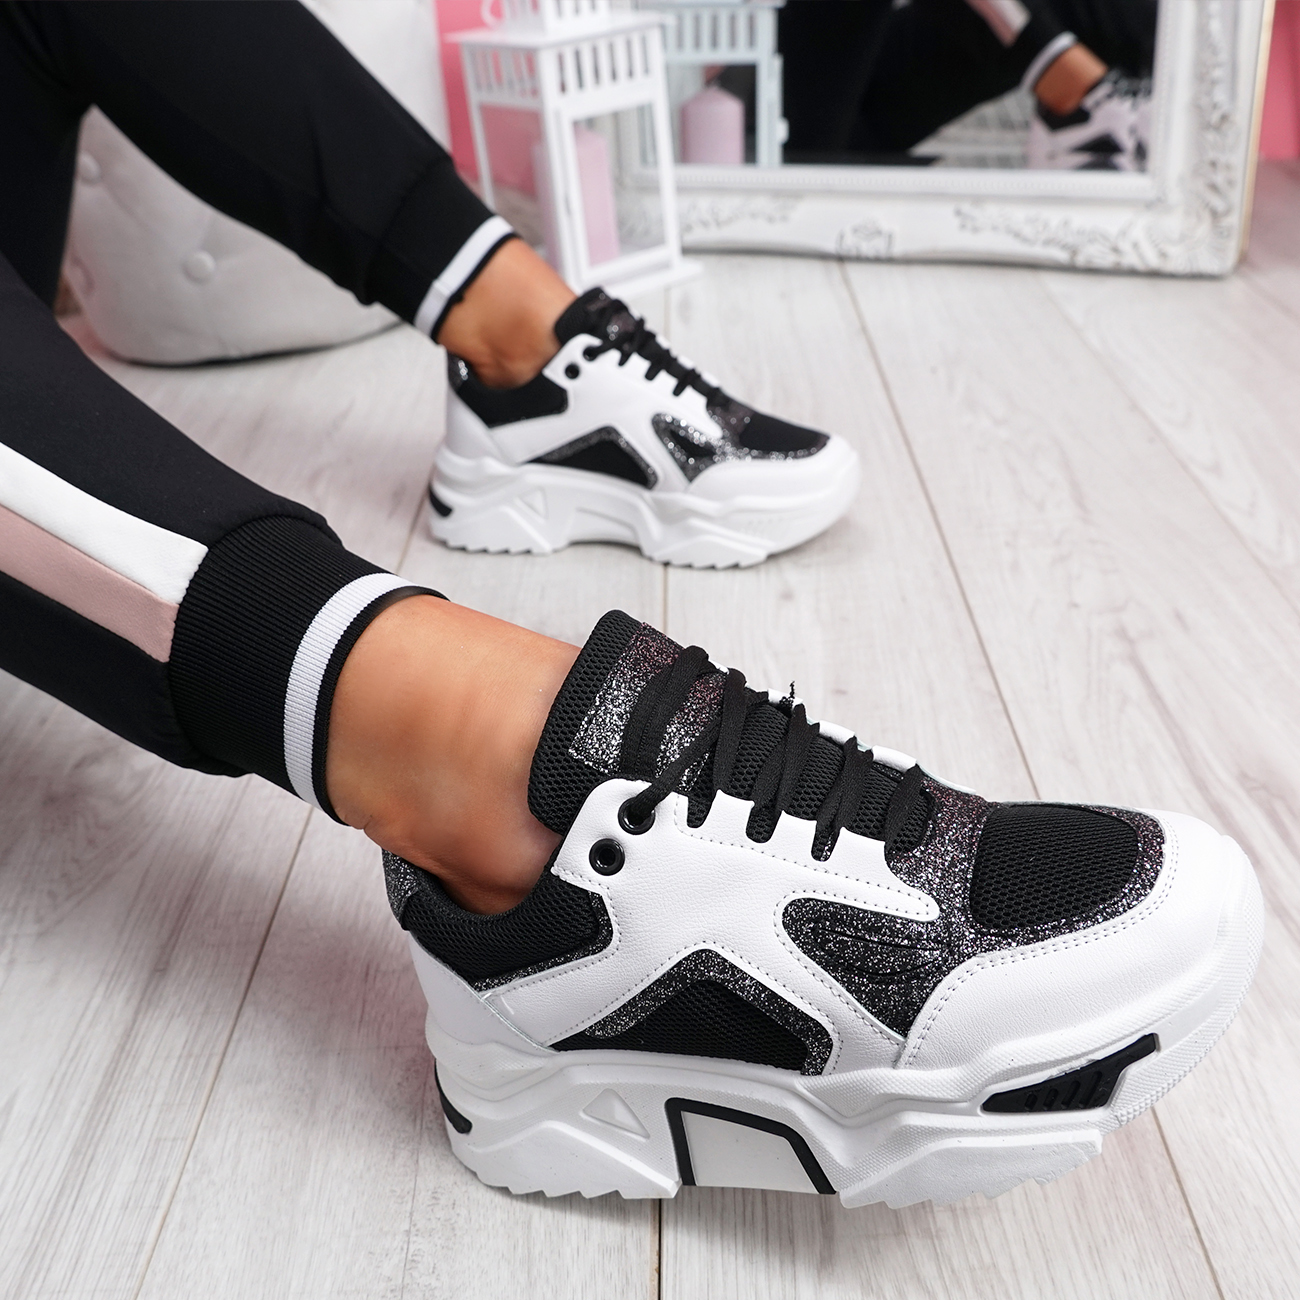 WOMENS LADIES CHUNKY SOLE PARTY SNEAKERS WOMEN TRAINERS SPORT PLATFORM ...